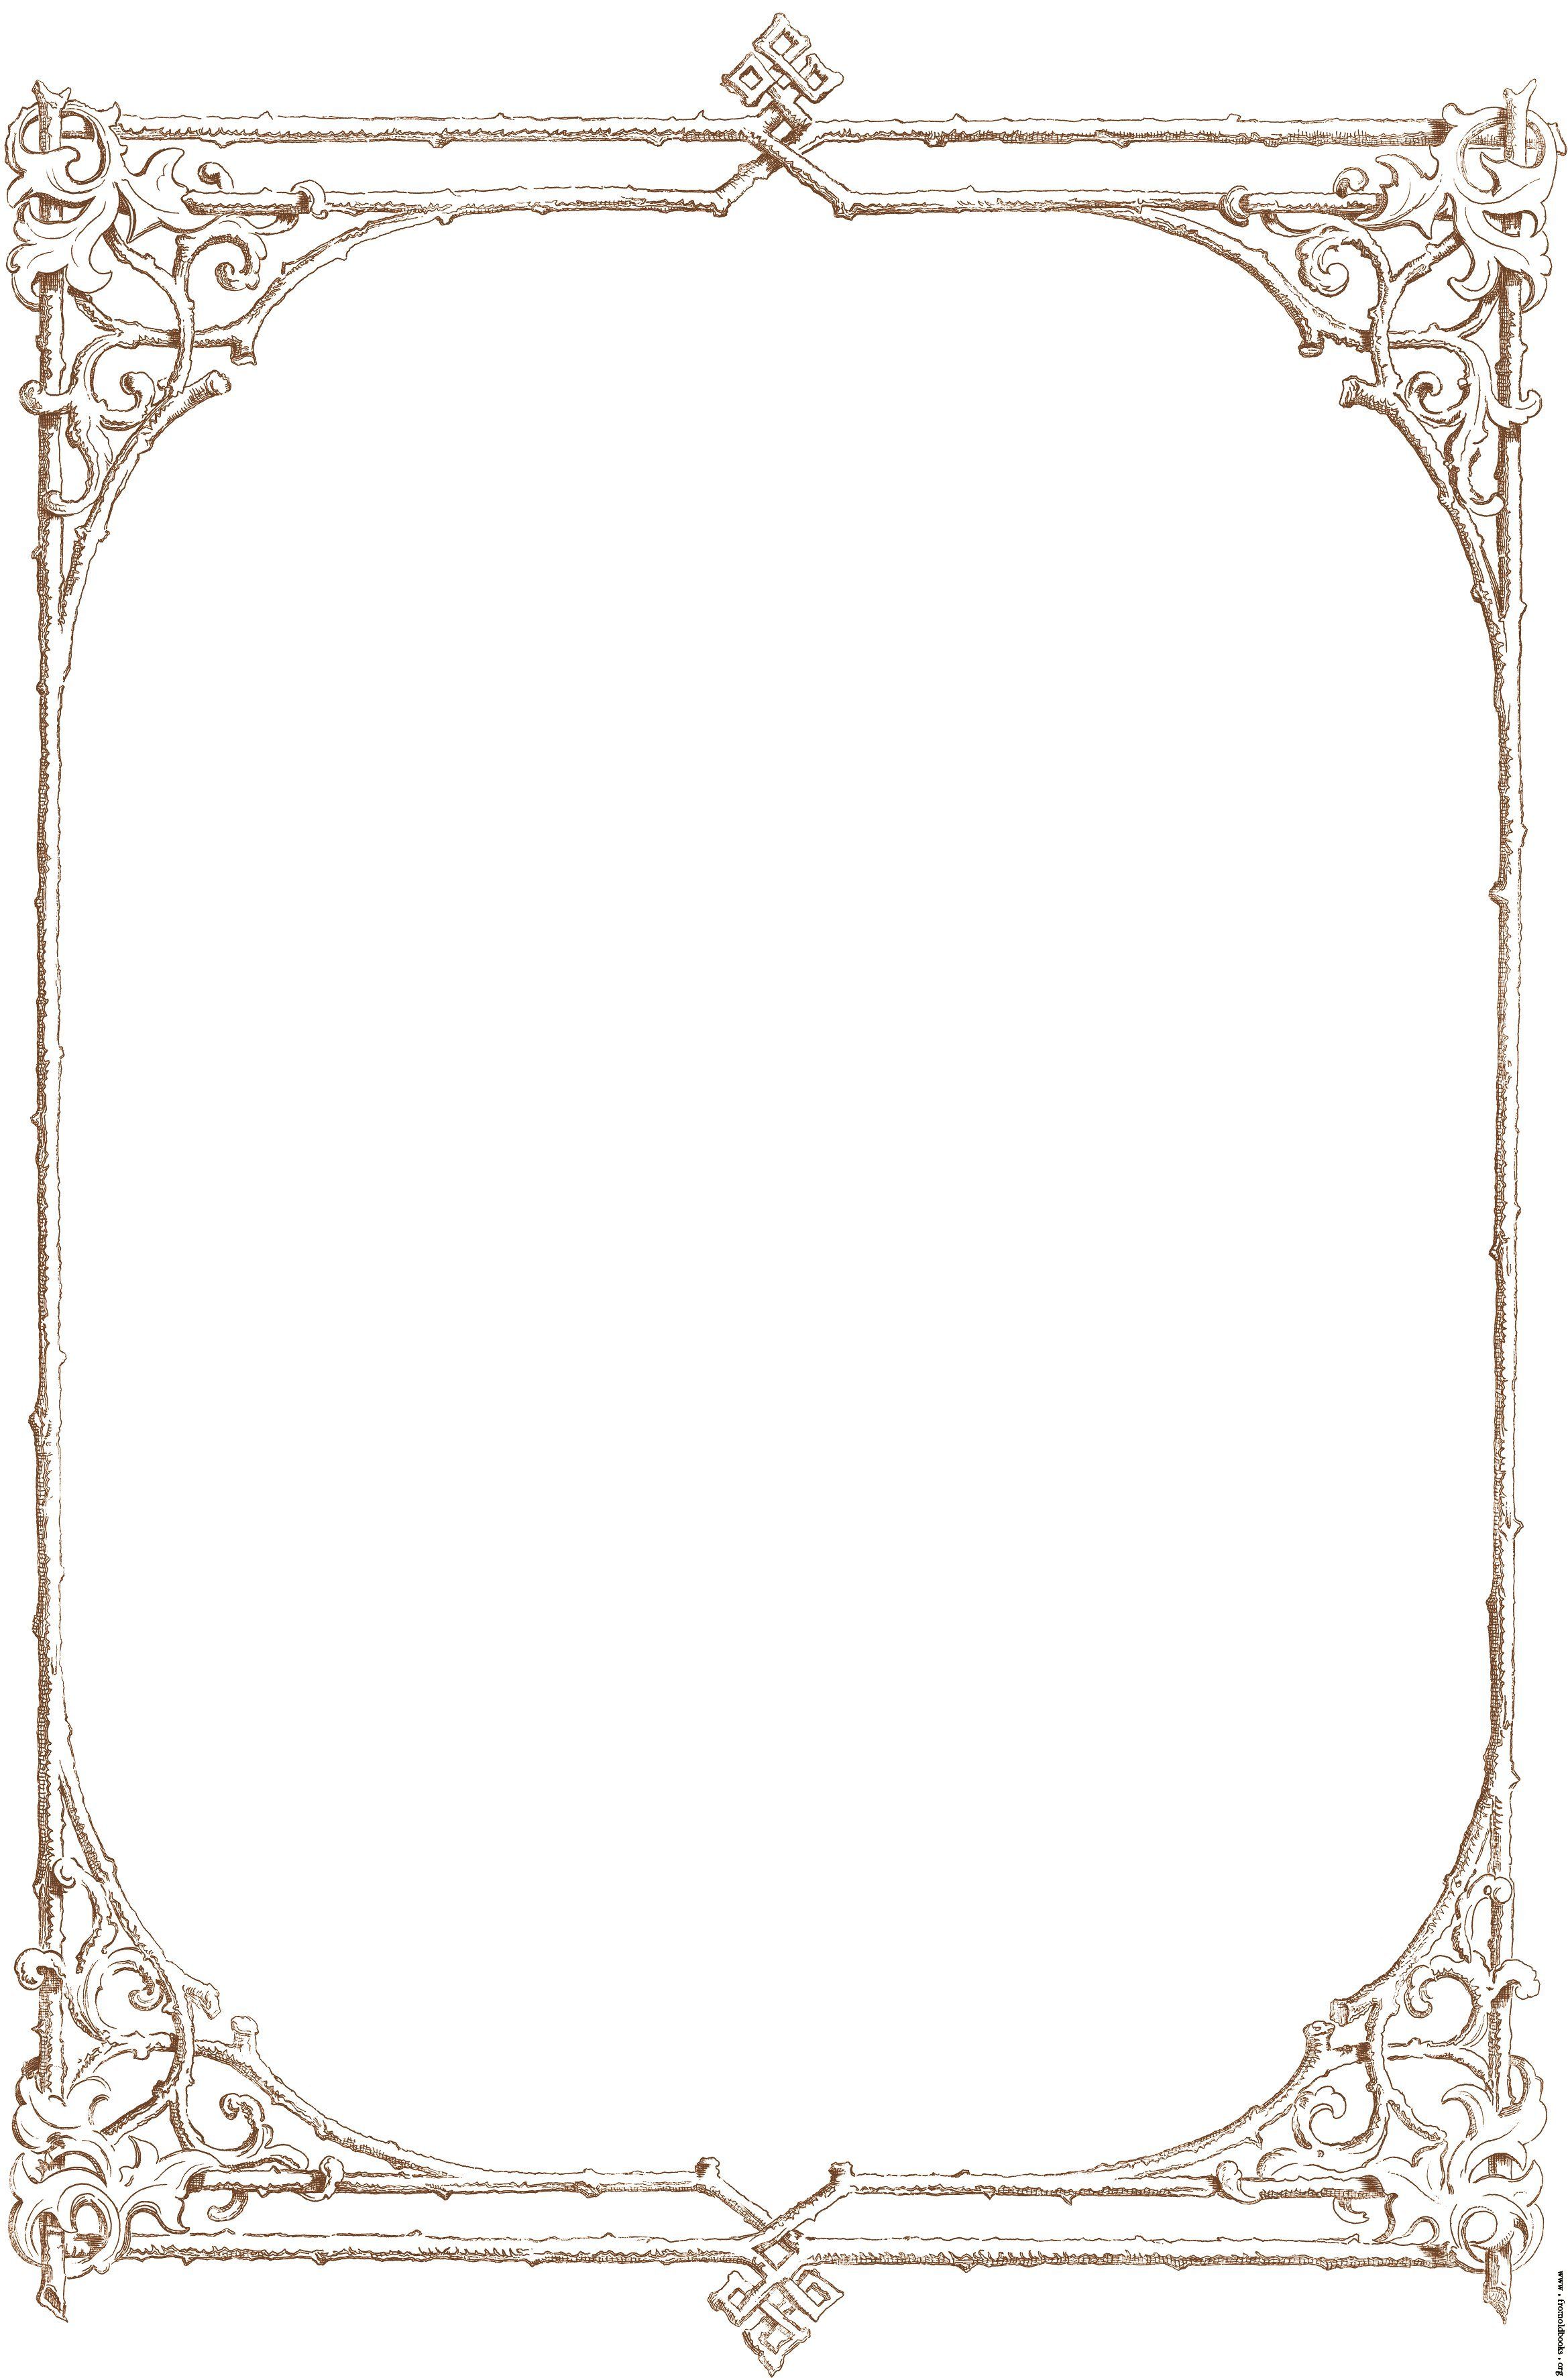 Free Clip Art Victorian Border Of Brown Twigs Details.